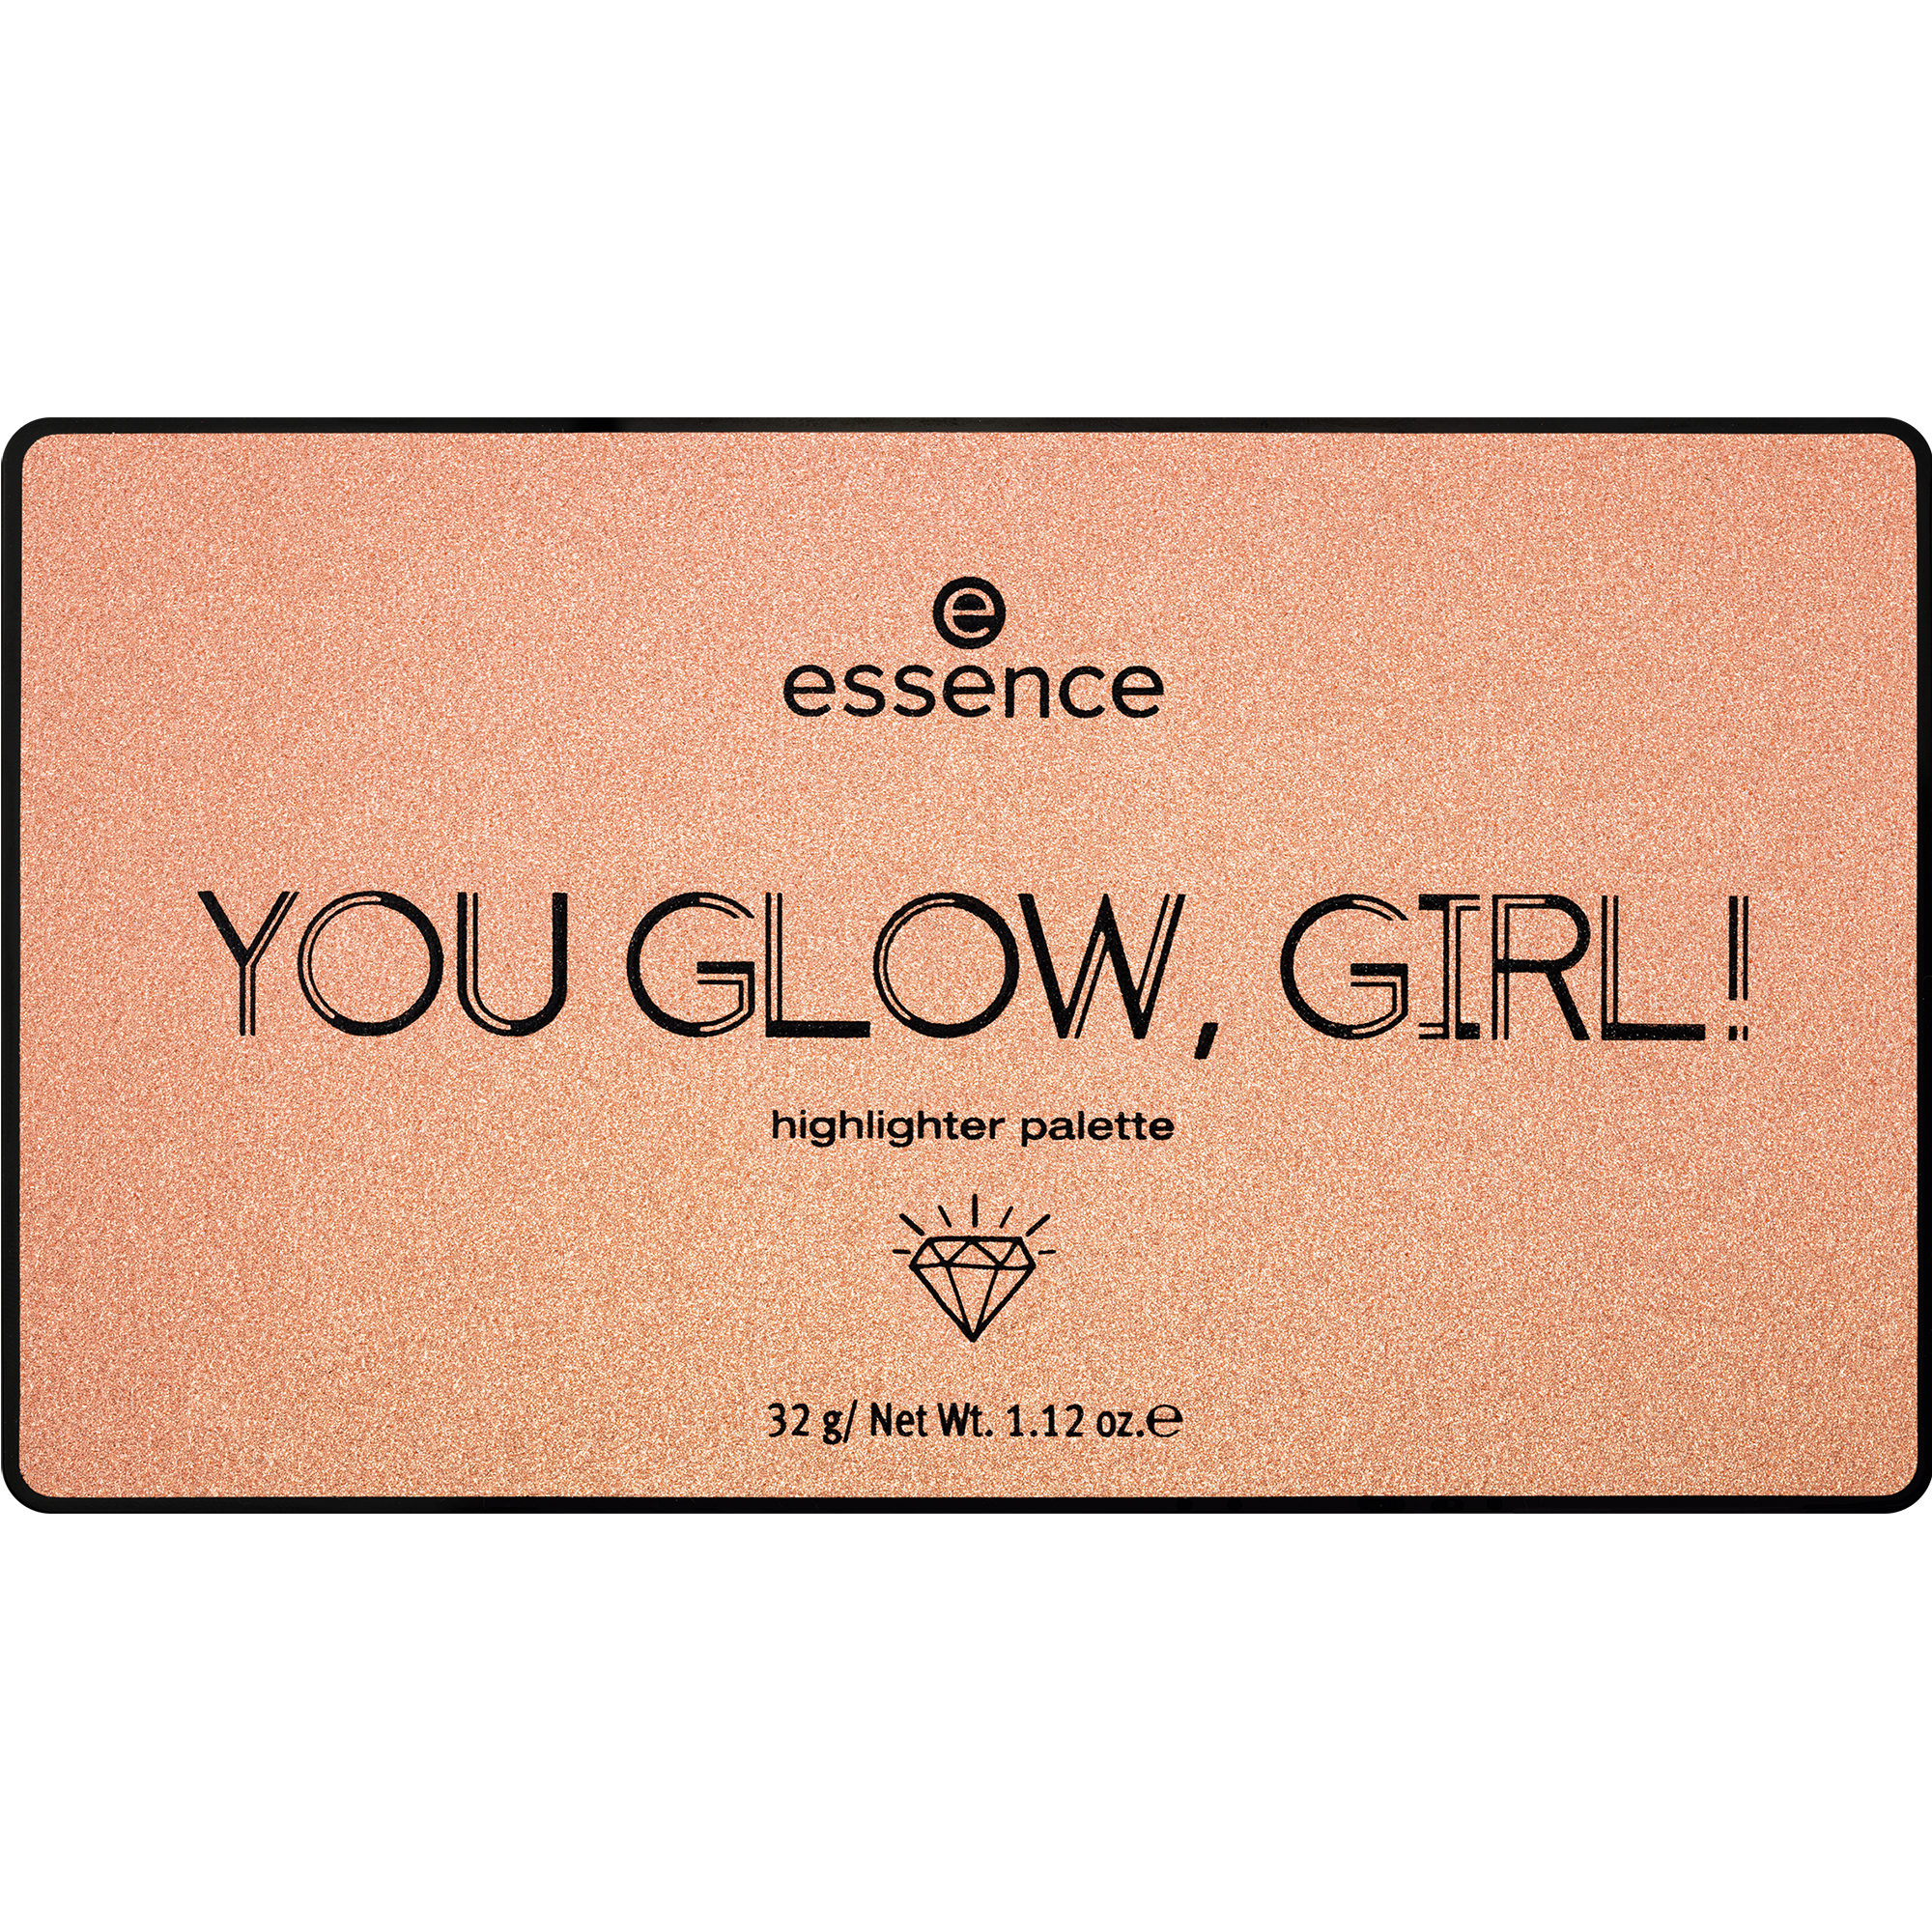 YOU GLOW, GIRL! highlighter palette